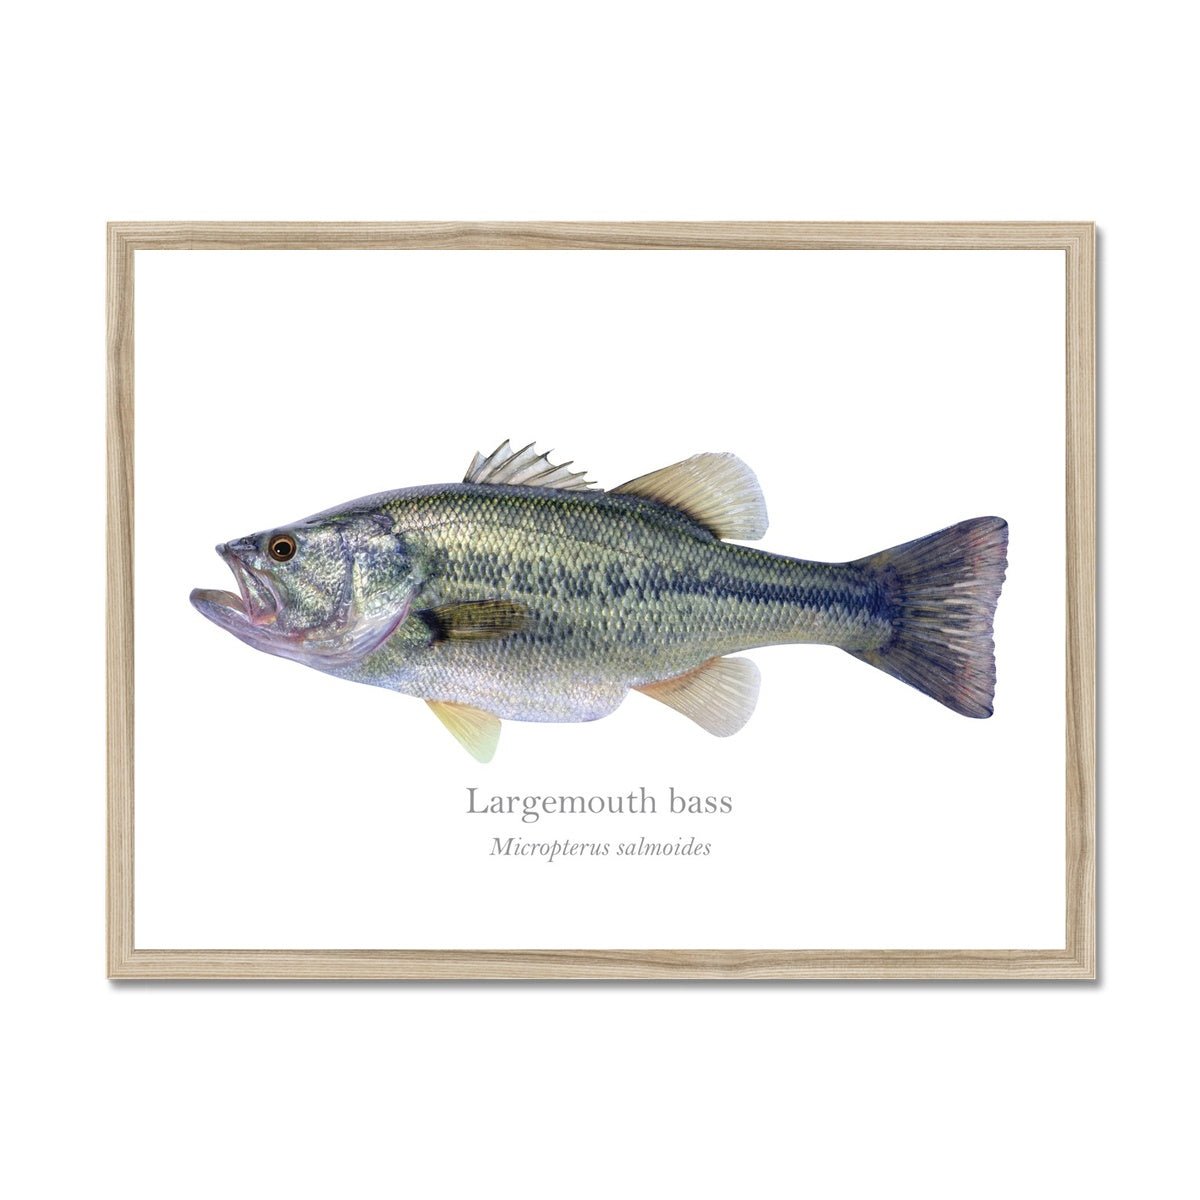 Largemouth Bass - Framed Print - With Scientific Name - madfishlab.com